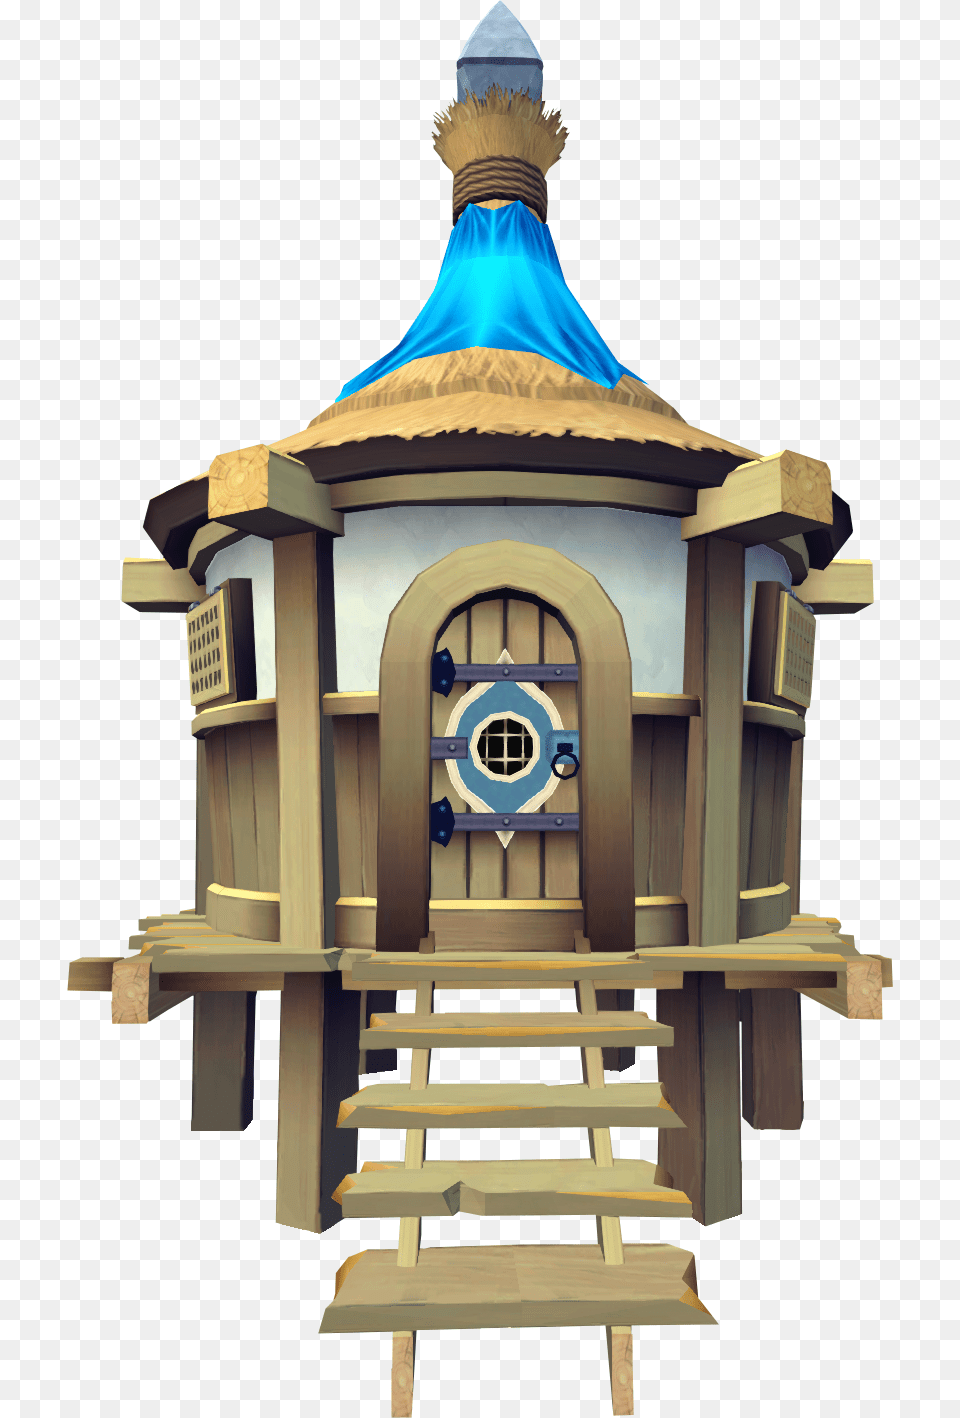 Wood, Architecture, Building, Clock Tower, Tower Png